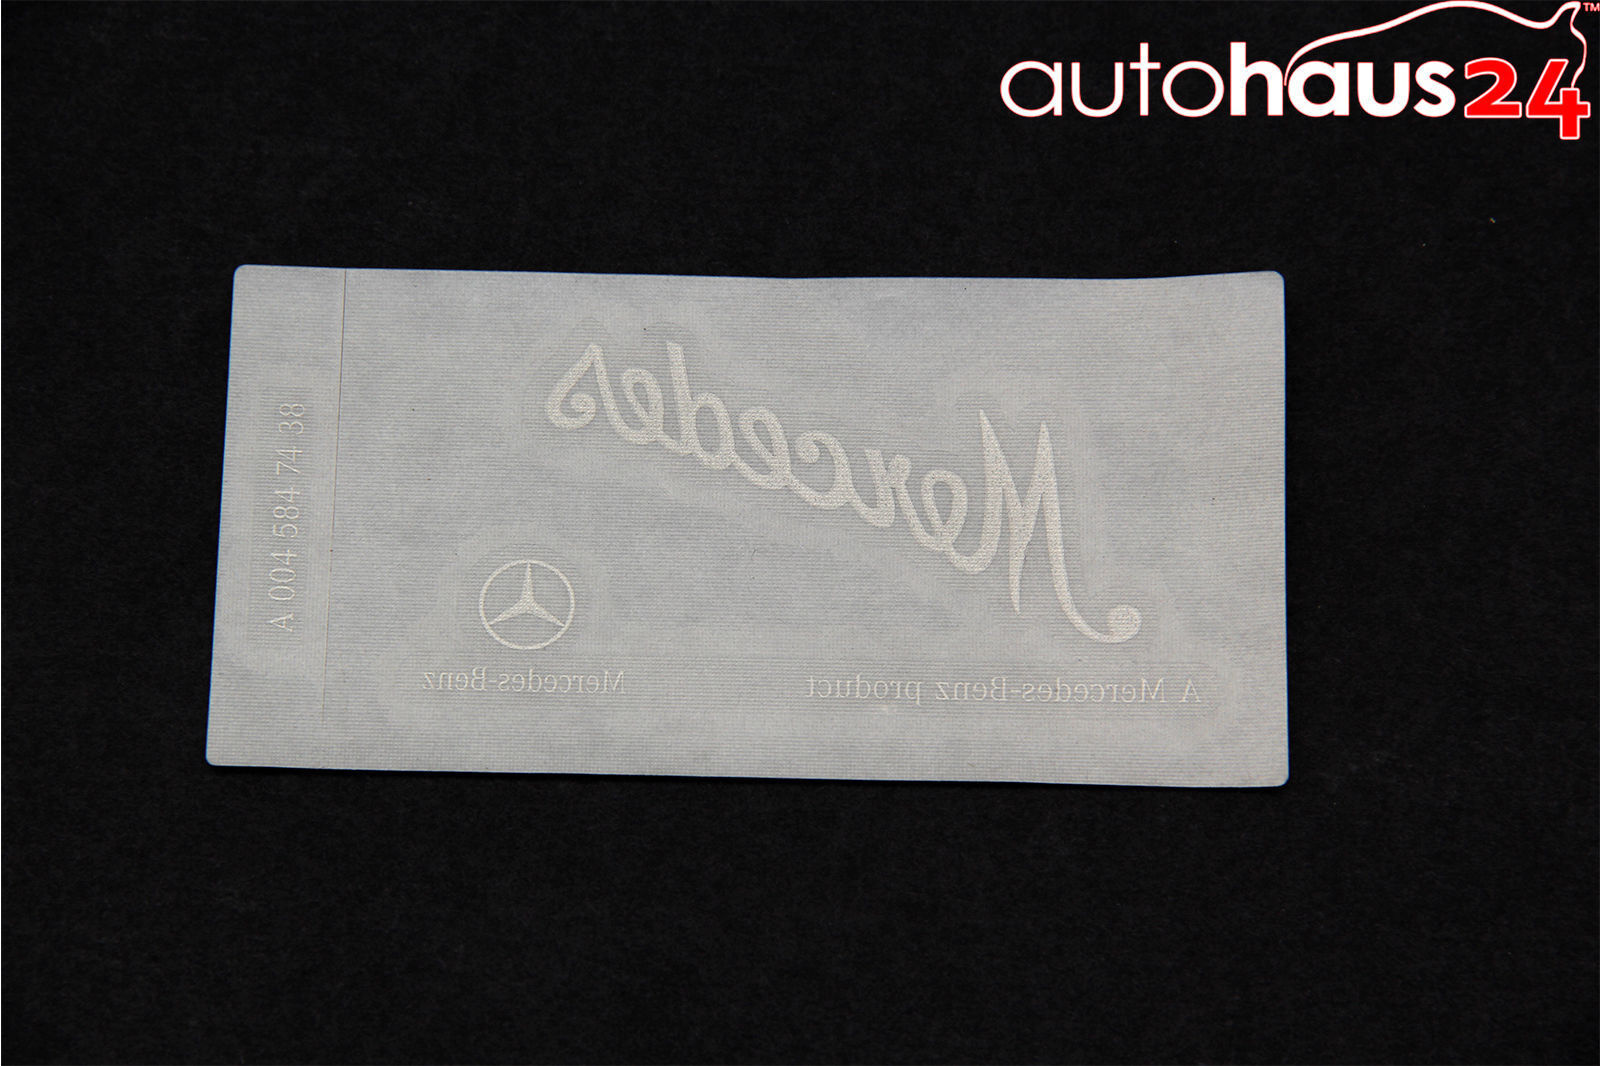 MERCEDES CLEAR WINDSHIELD GLASS DECAL STICKER SIGNATURE SIGNED BY MERCEDES BENZ